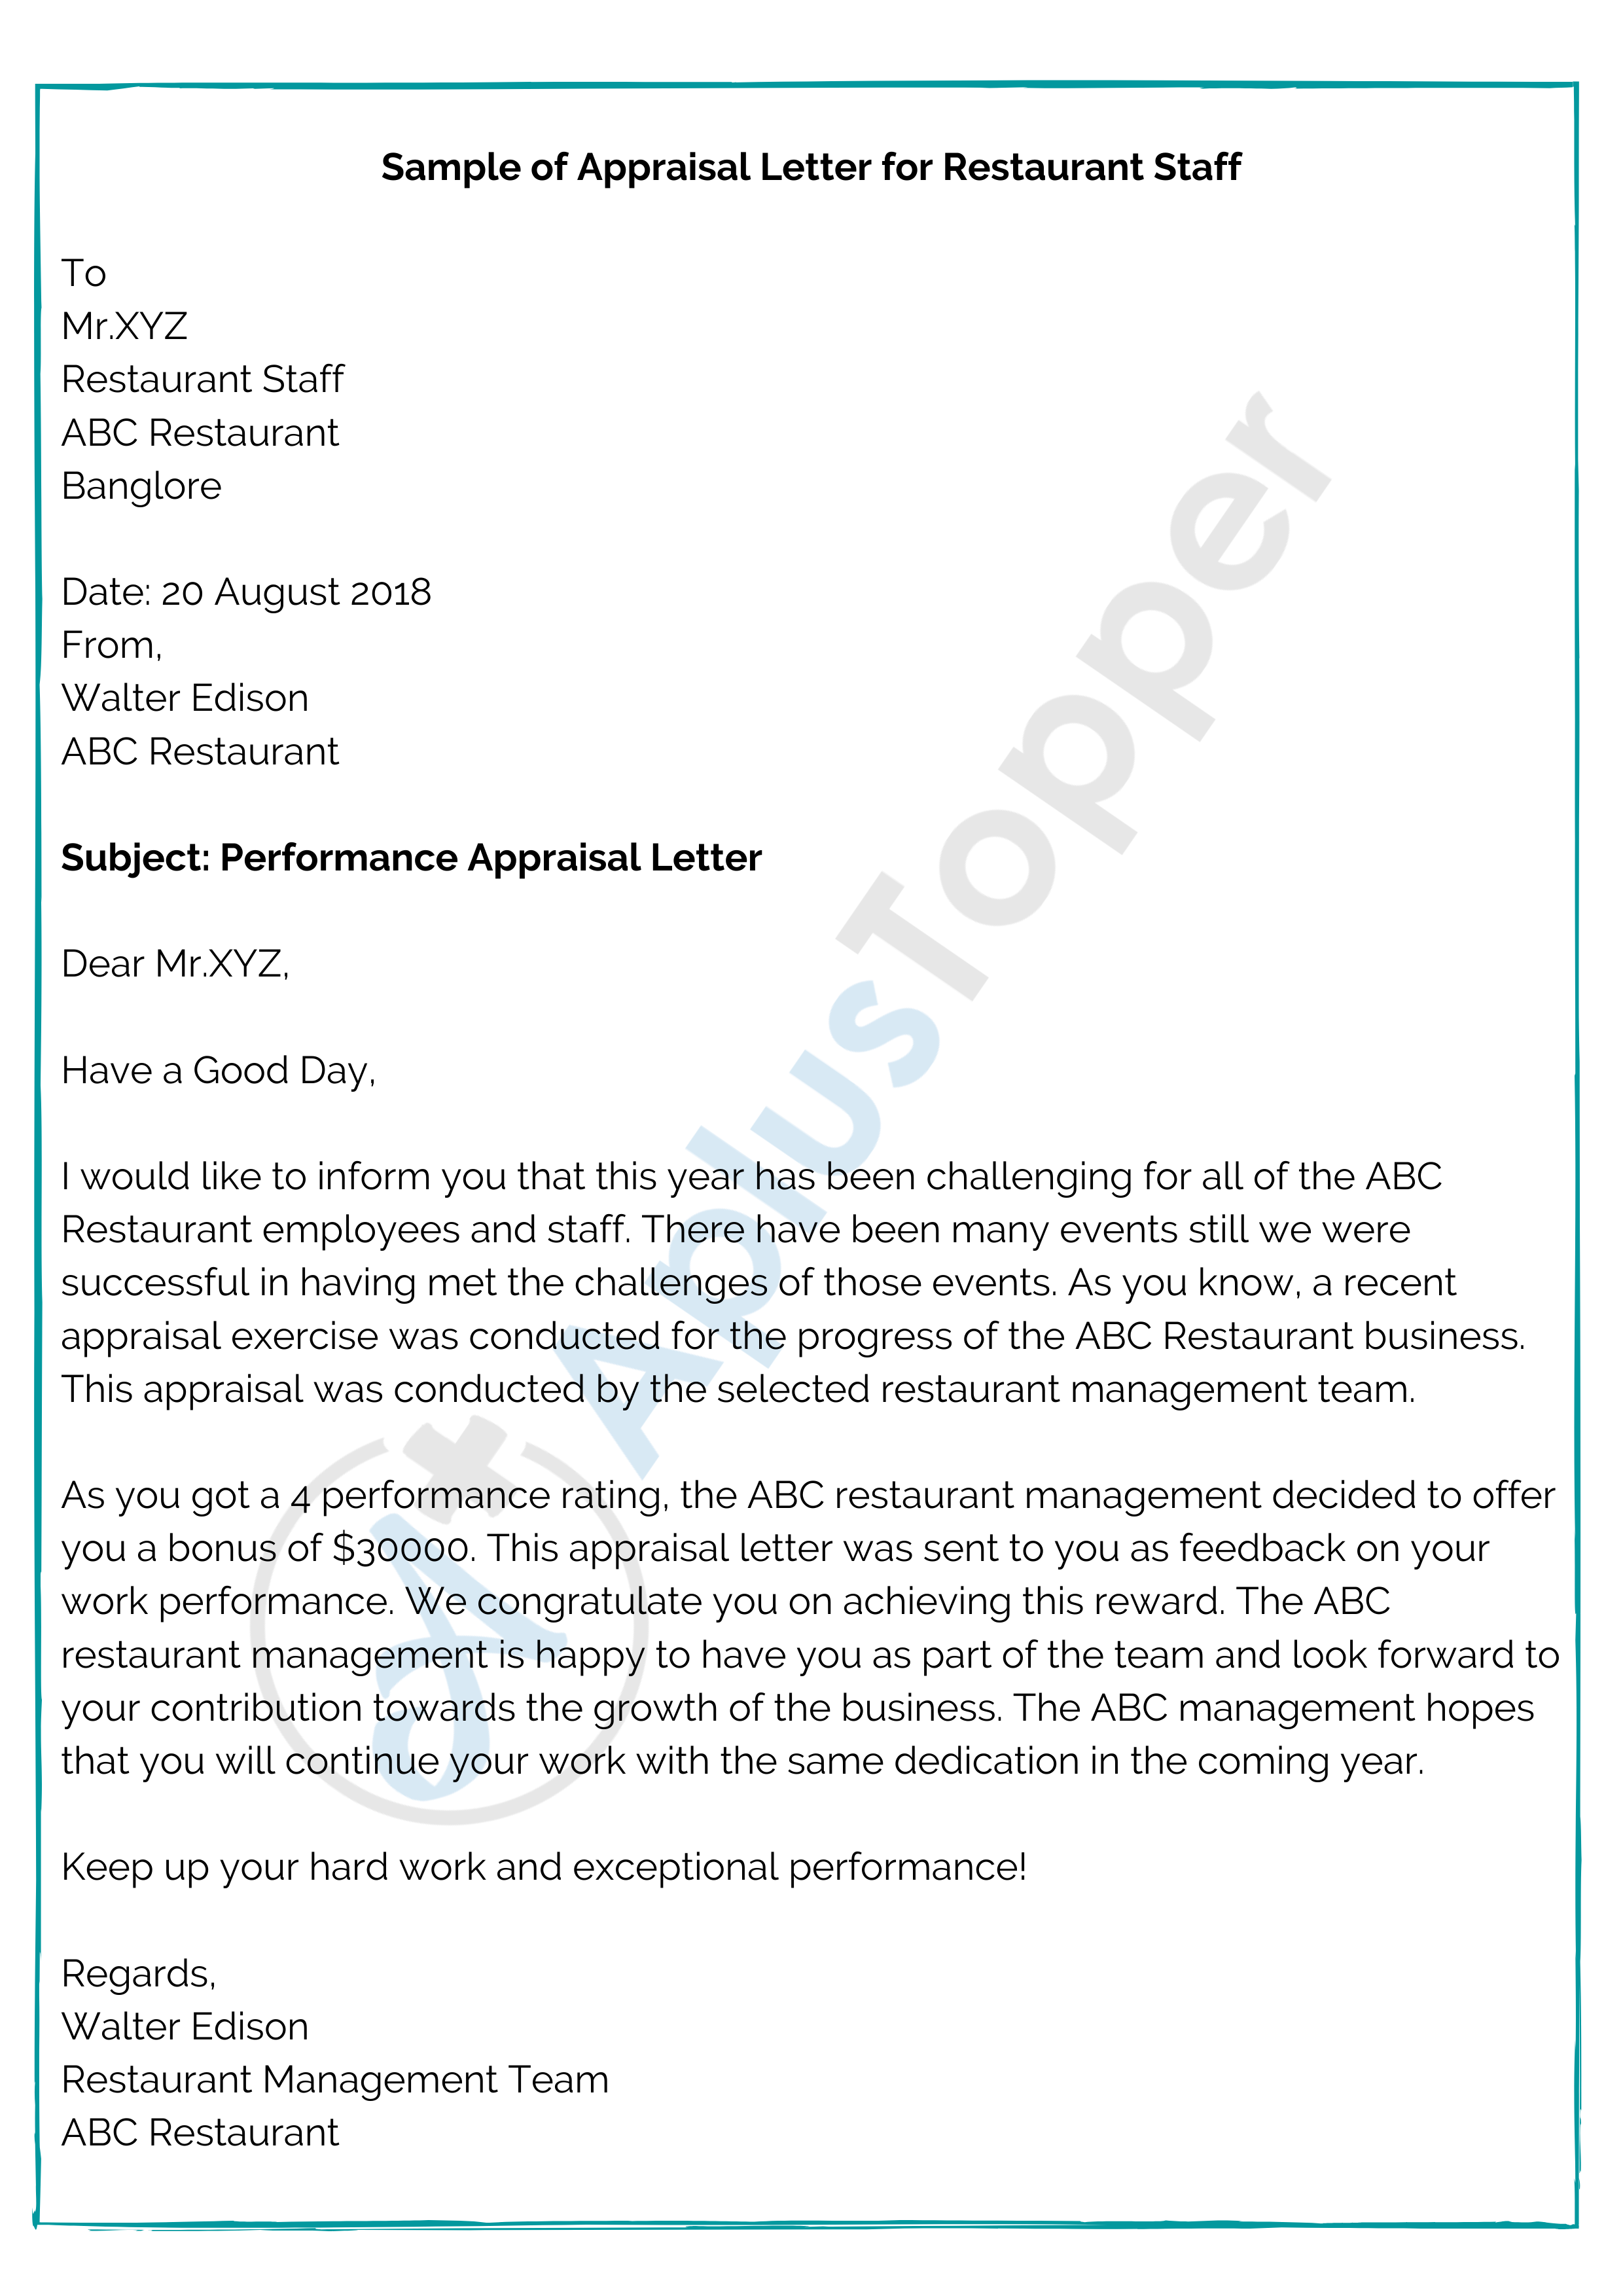 Appraisal Letter  Format, Samples, Examples, How To Write